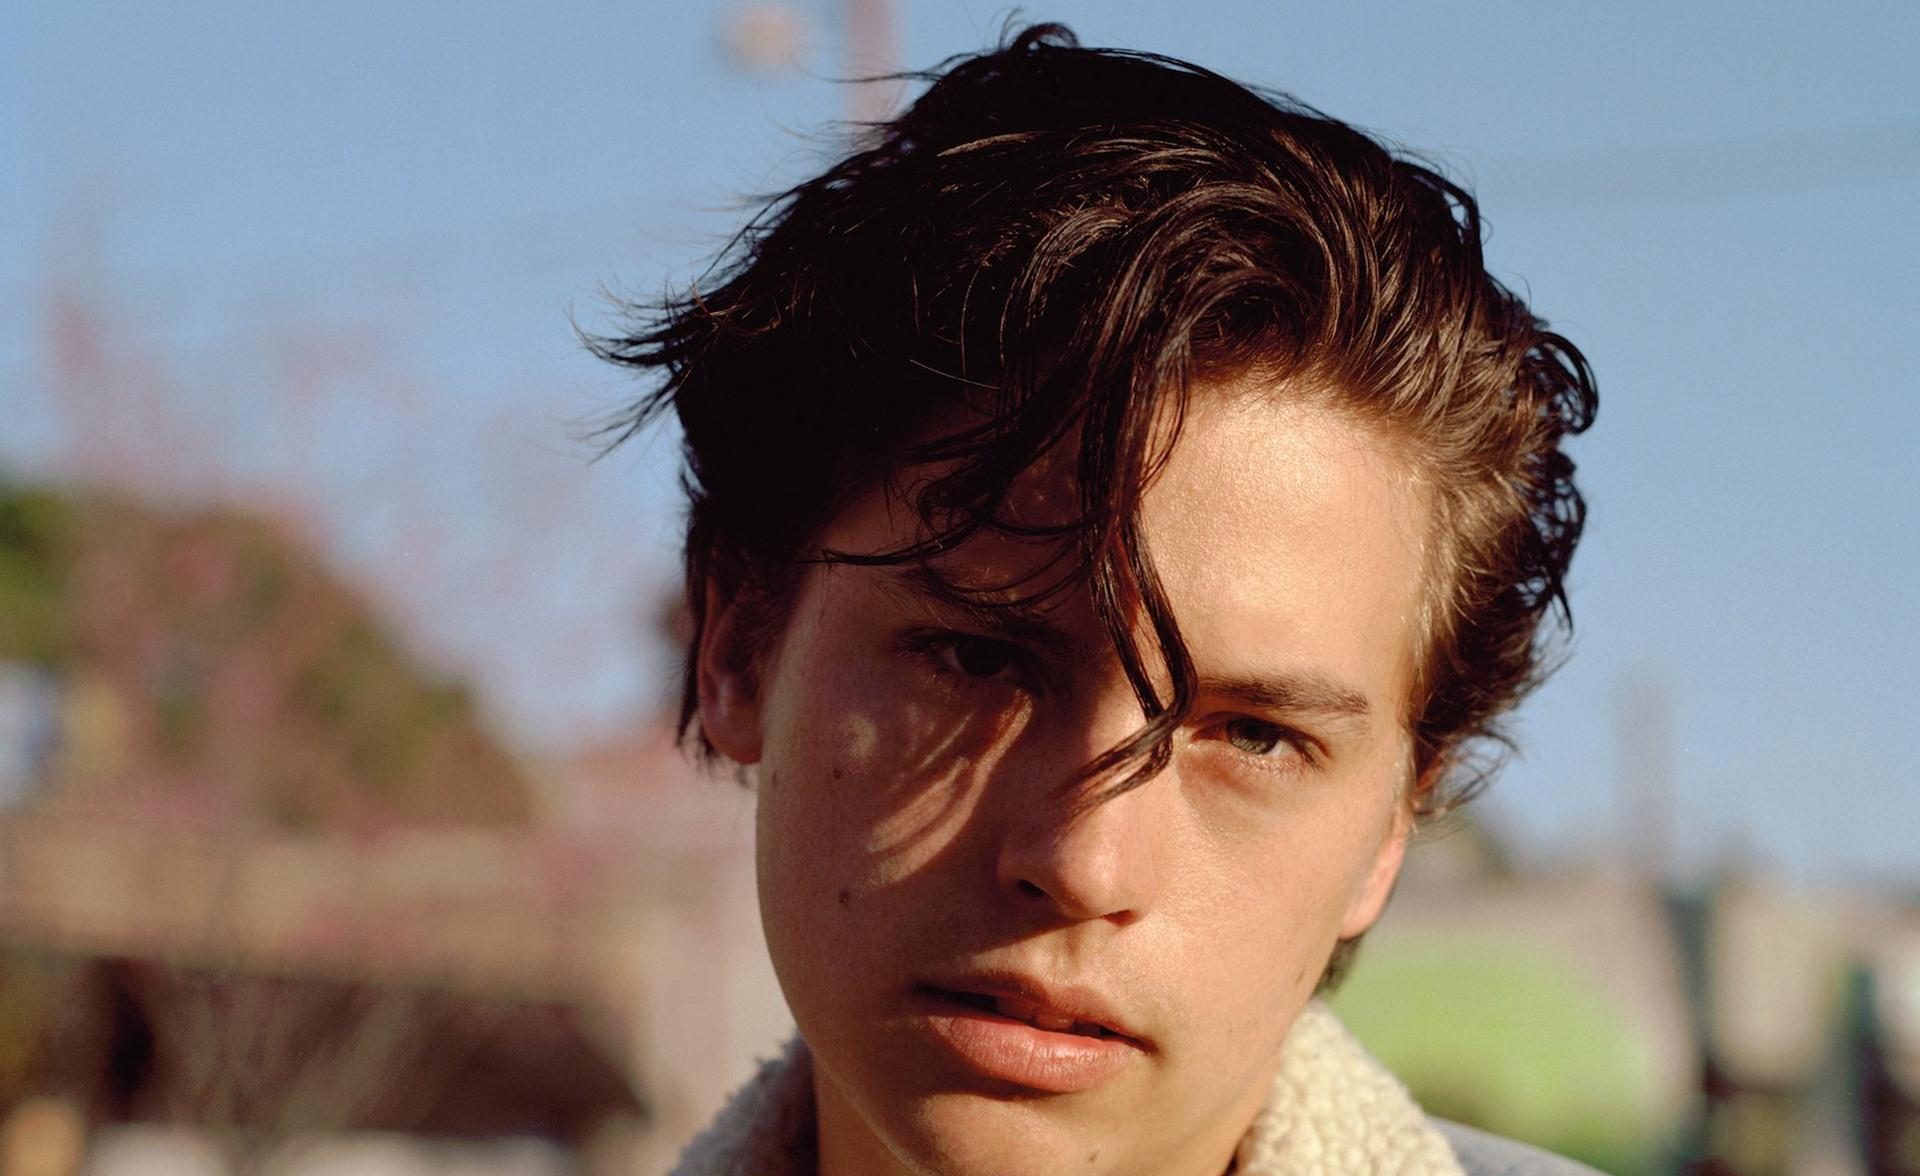 Who is Cole Sprouse dating in 2021?